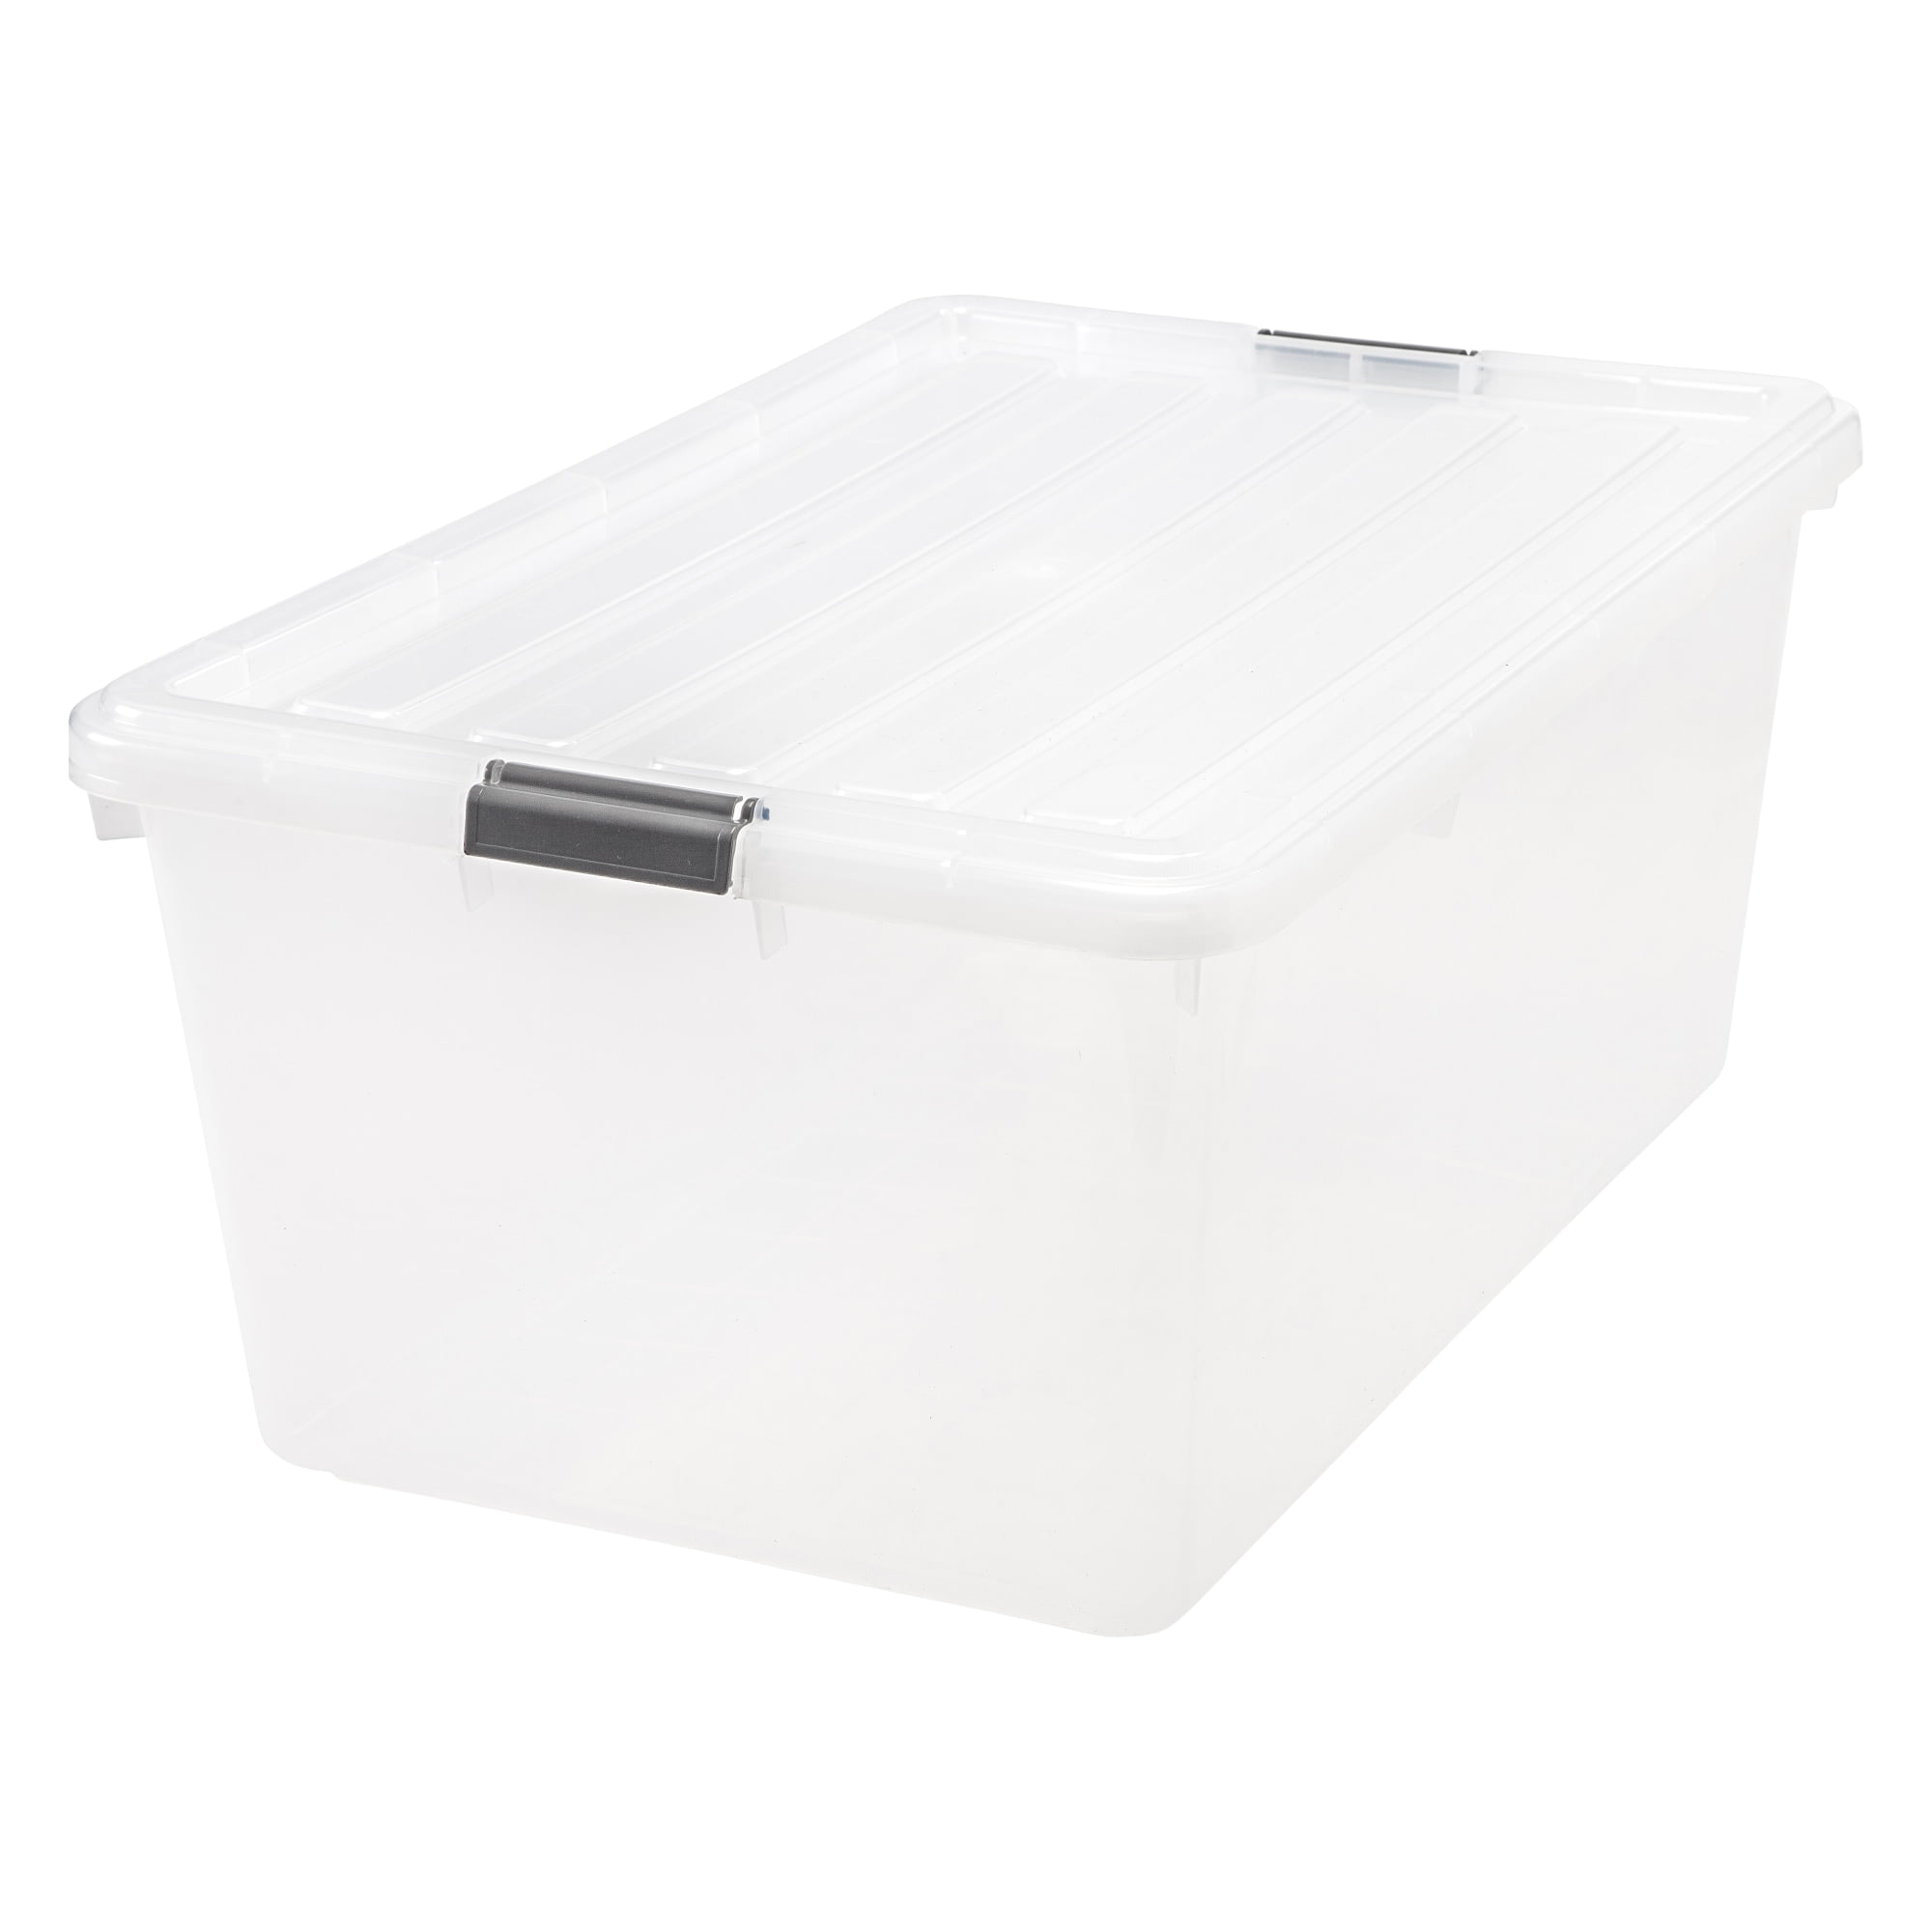 6 Pk 68 Qt Jumbo Stacking Storage Latch Box Bin Containers Totes Space-Saving 